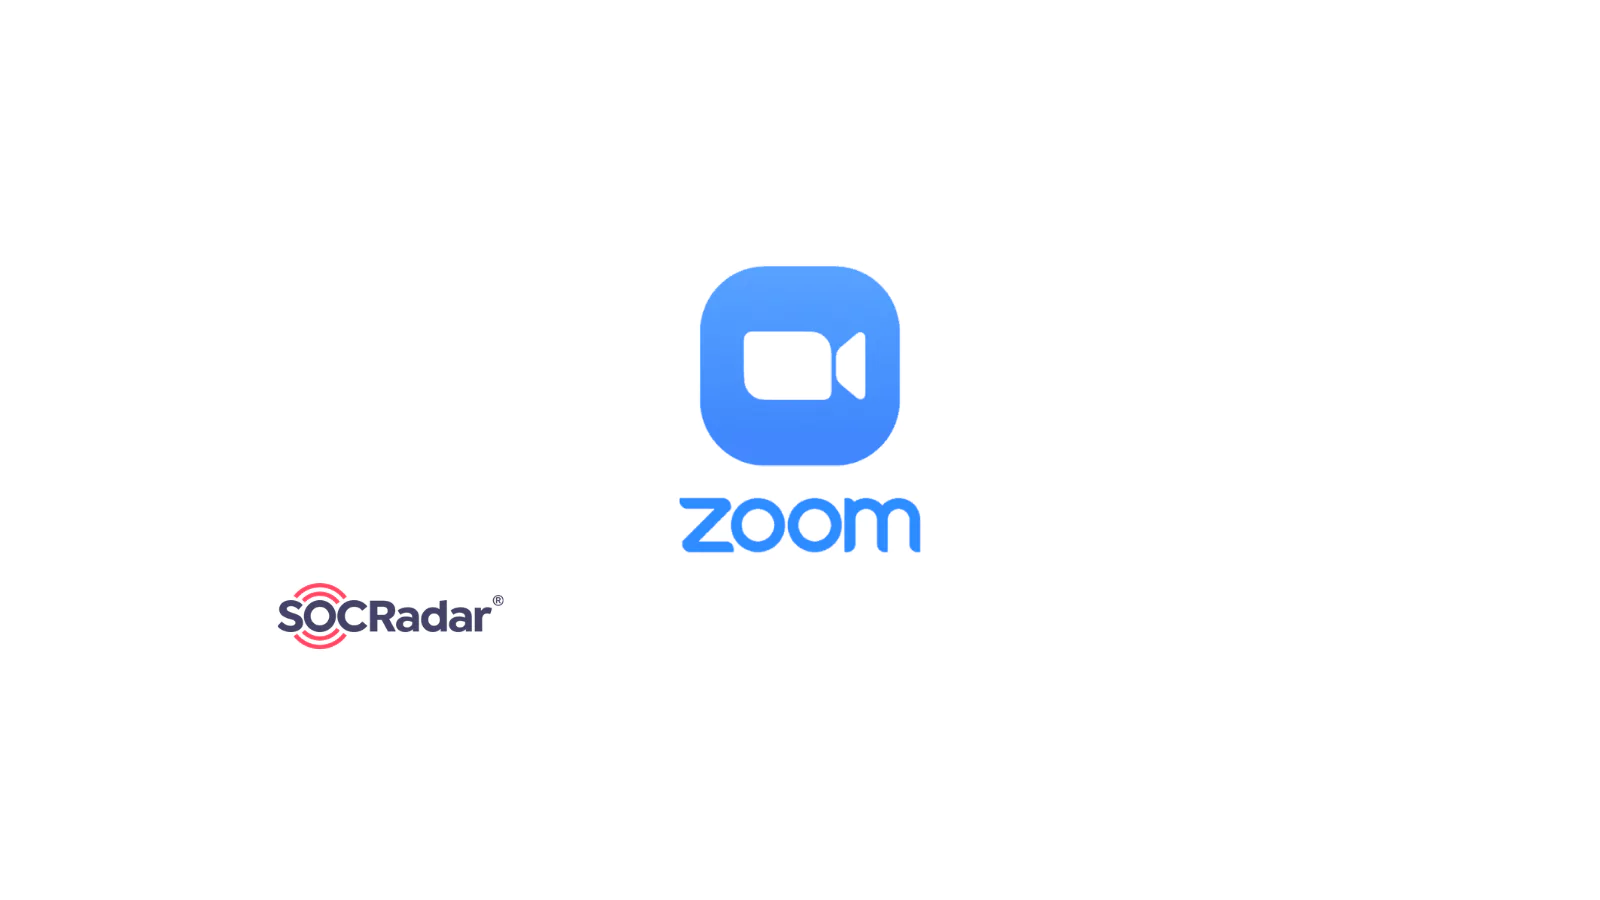 SOCRadar® Cyber Intelligence Inc. | Urgent Patching Required for High Severity Vulnerabilities in Zoom